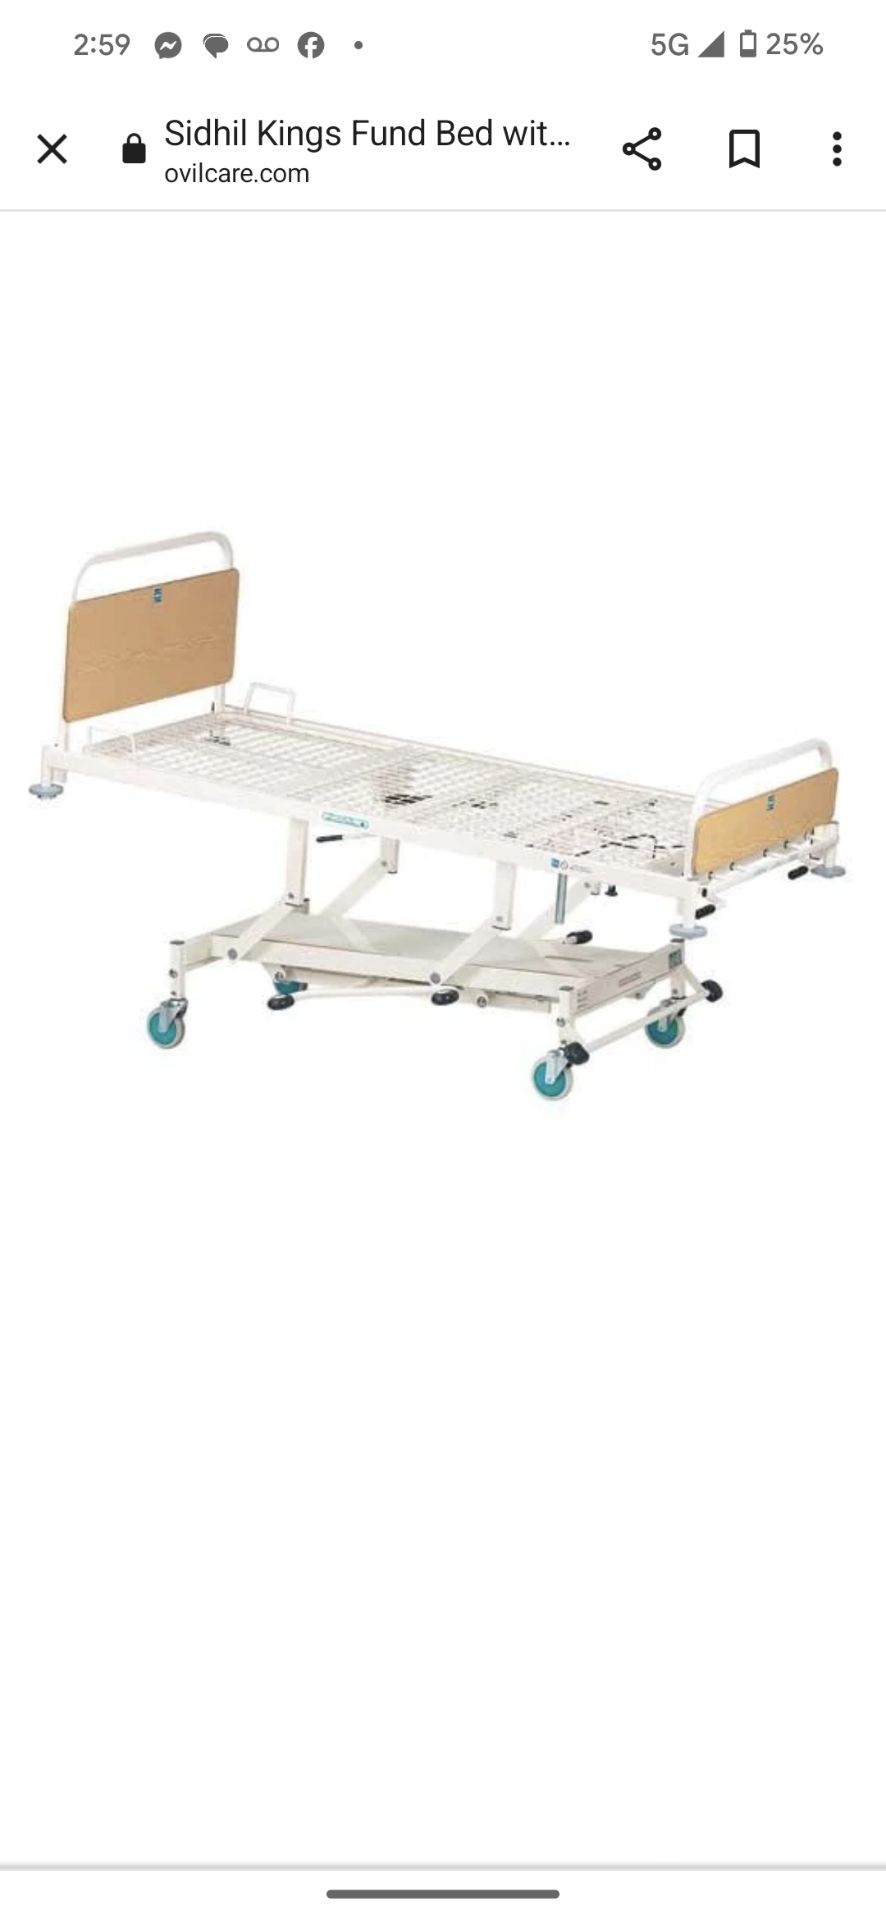 1 x Sidhil Kings Fund Hydraulic Hospital Bed With Mattress - Image 4 of 4